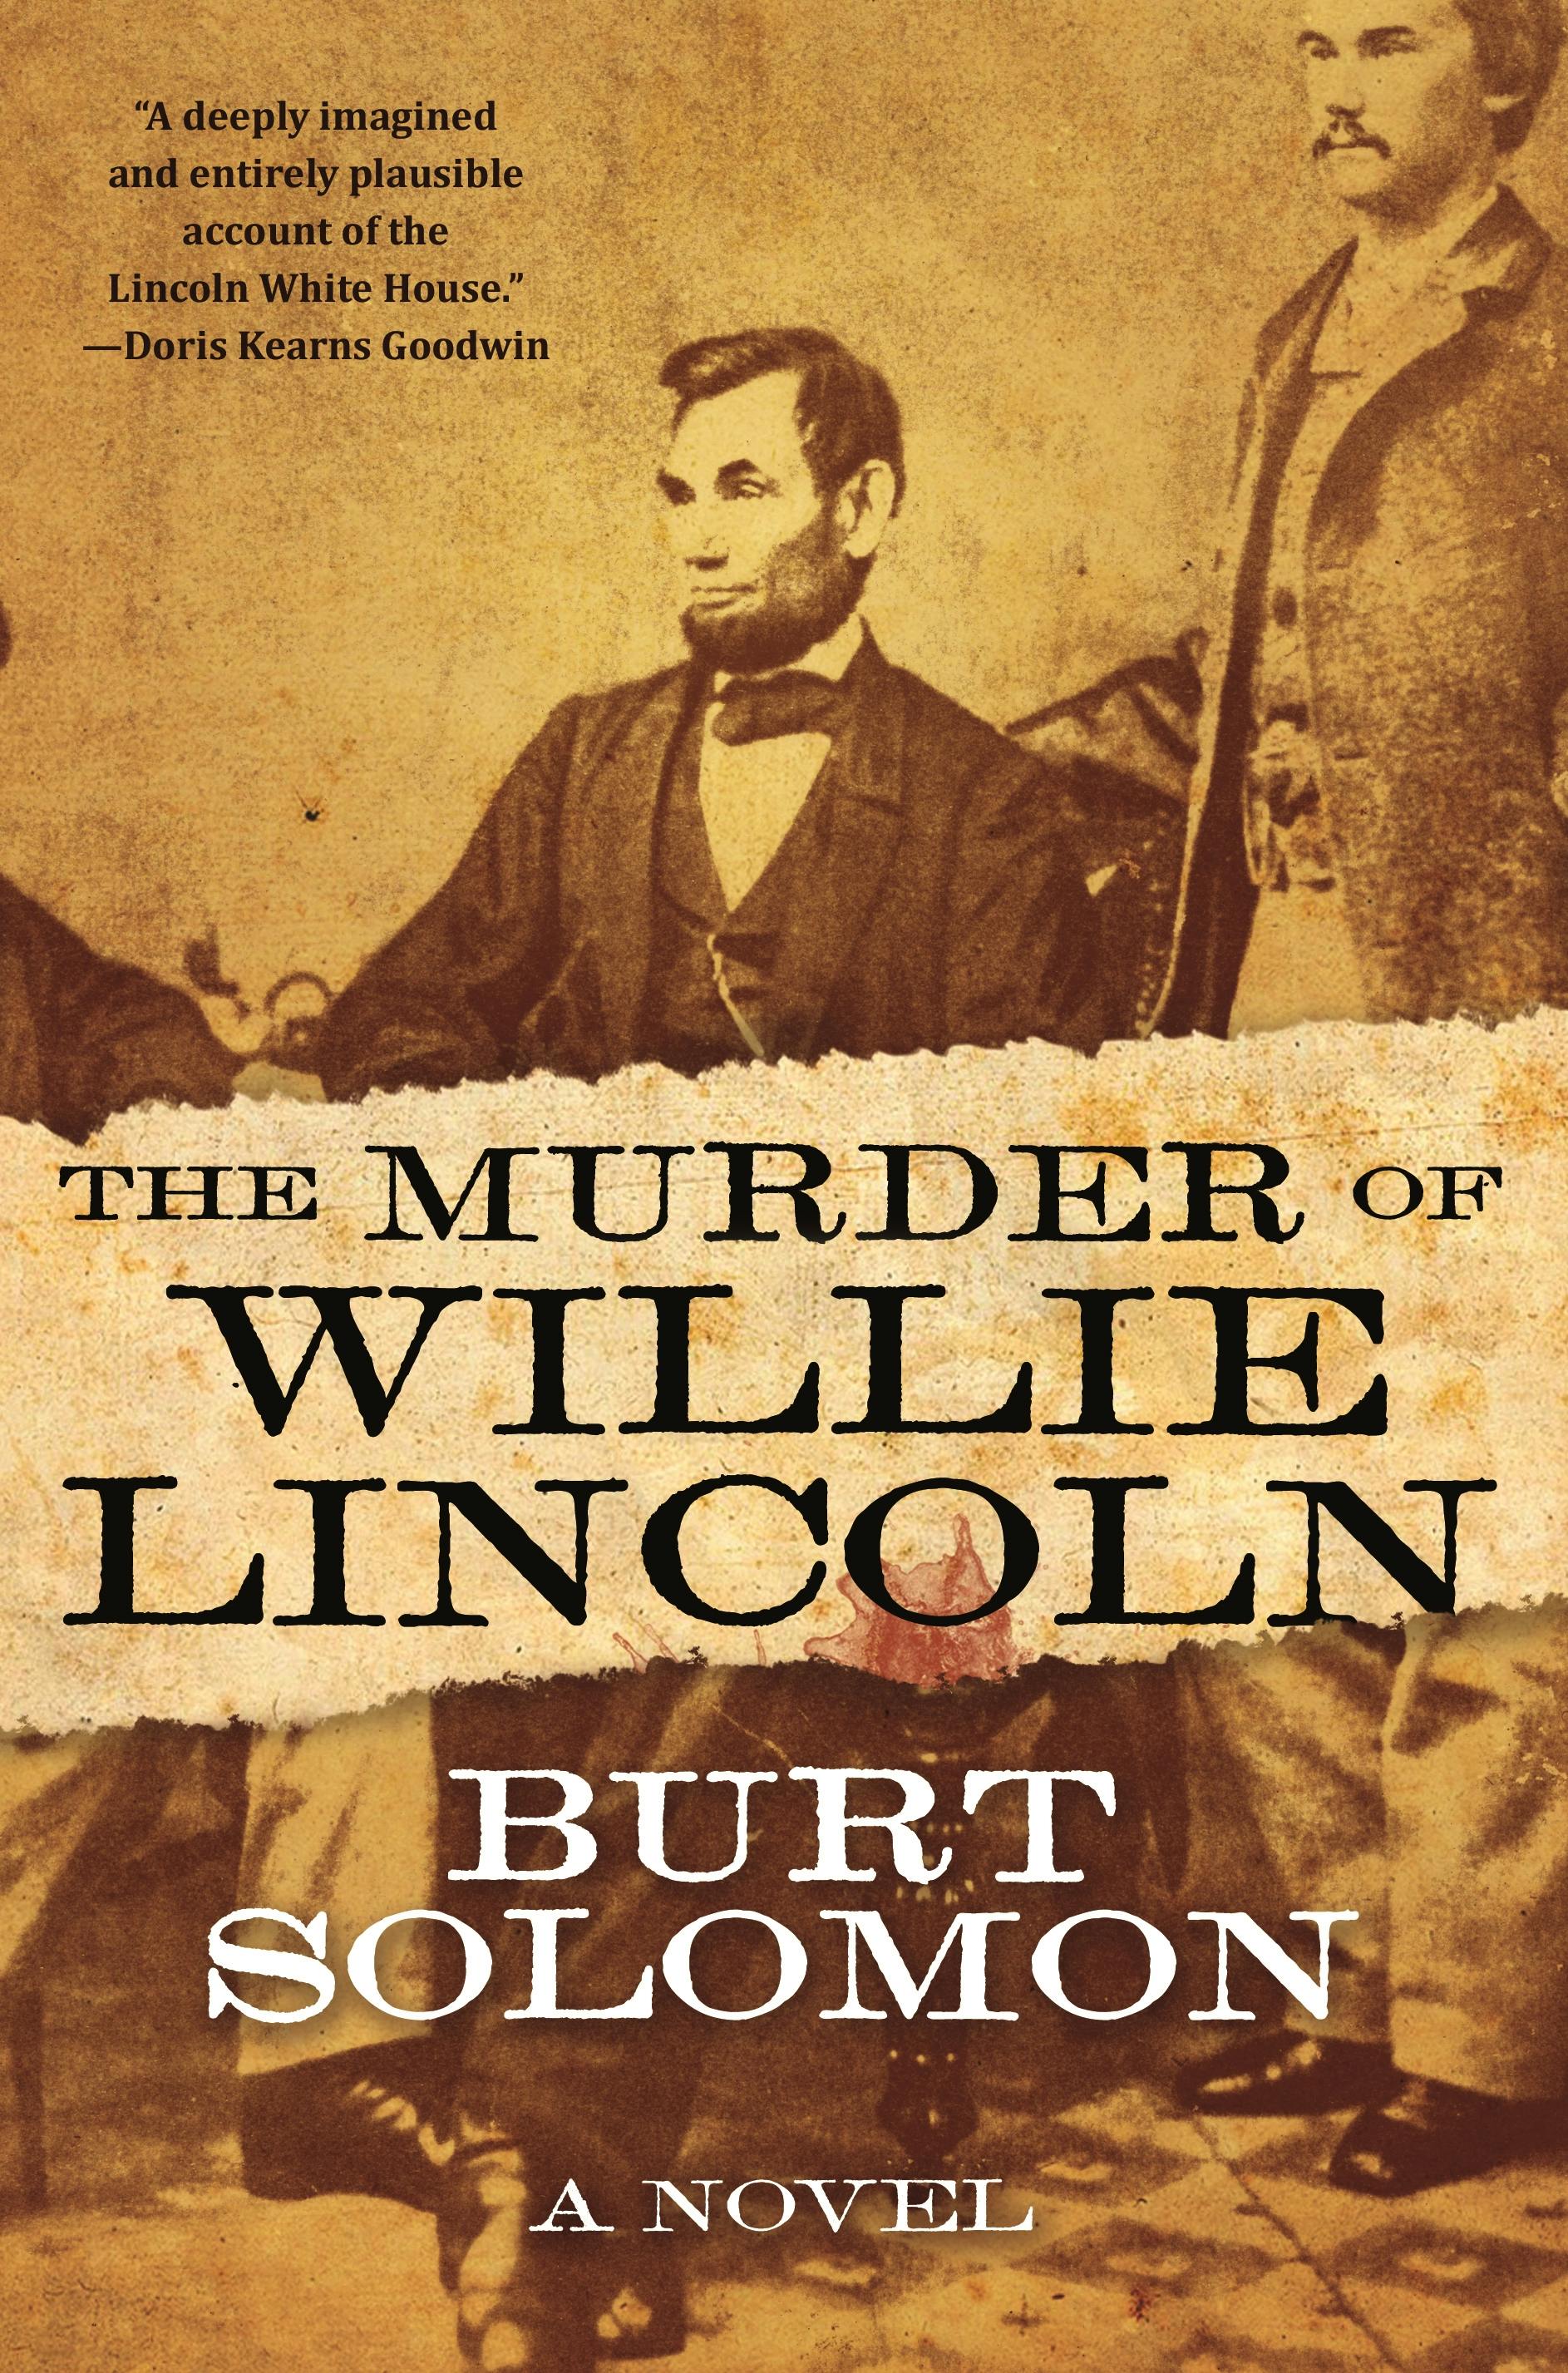 Cover for the book titled as: The Murder of Willie Lincoln